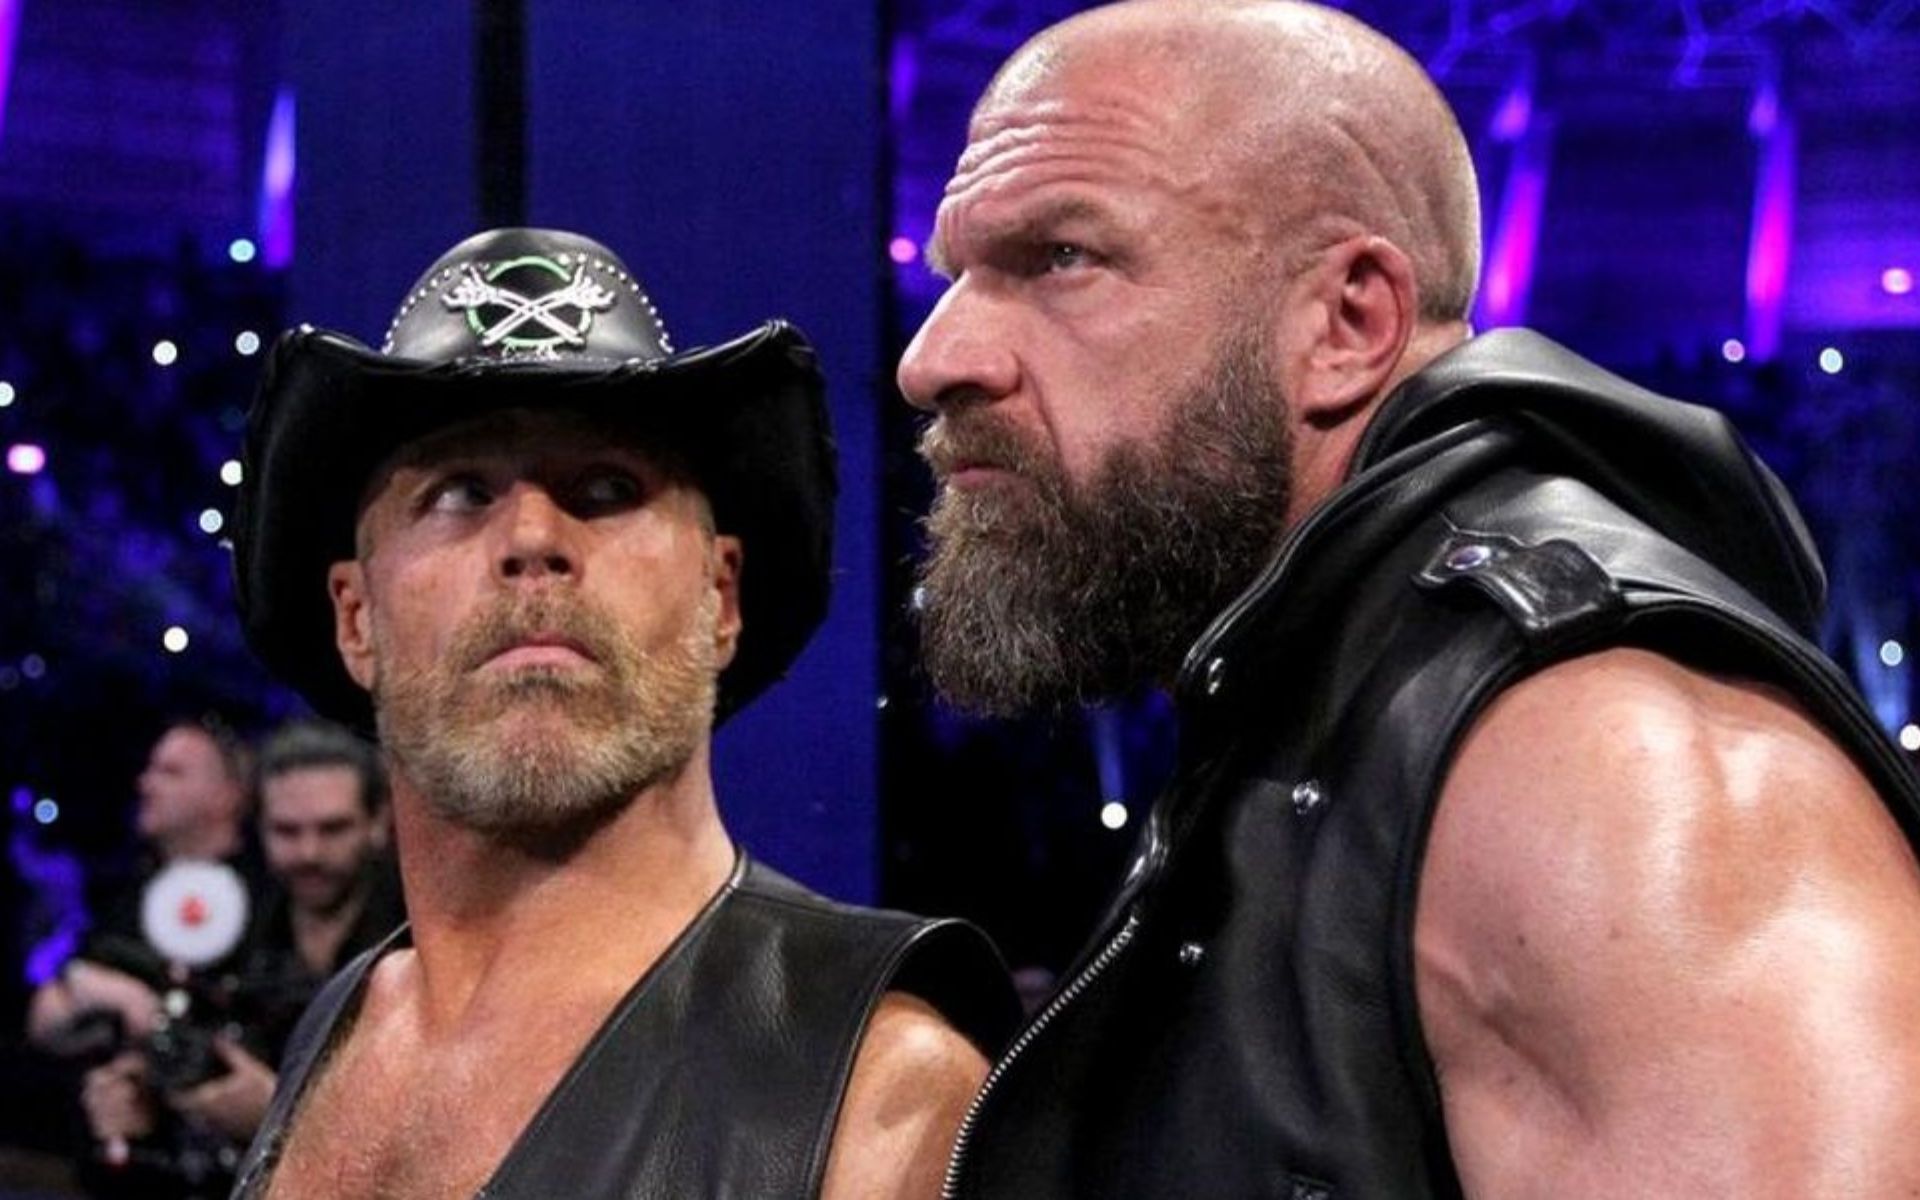 Triple H and Shawn Michaels will return on the upcoming episode of RAW